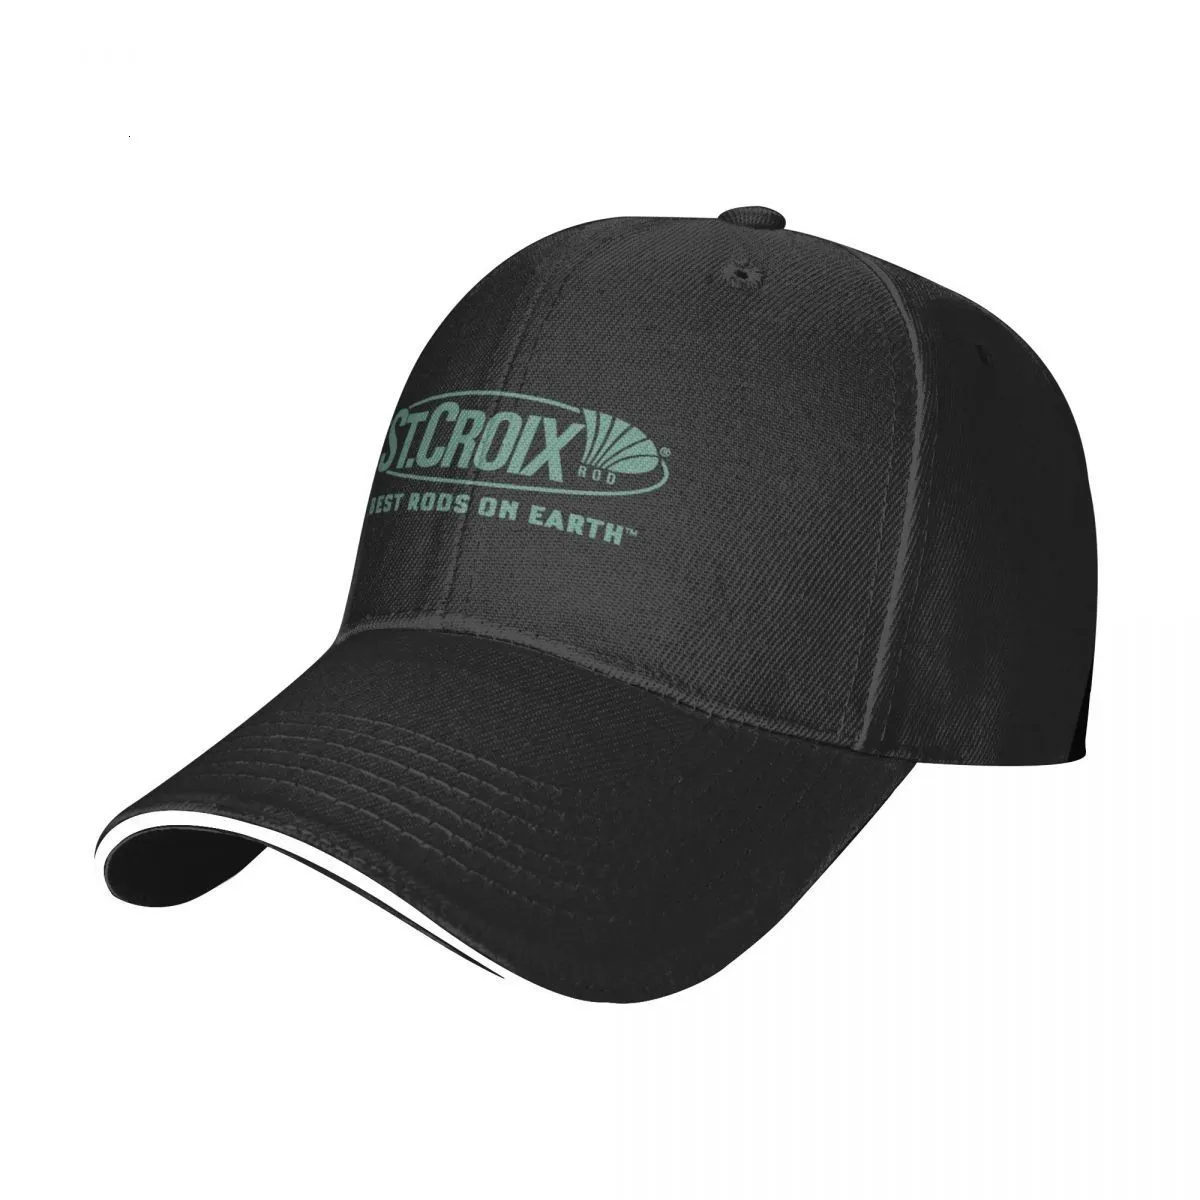 FISHING ST CROIX Black Adjustable Baseball Cap Wild Ball Hat For Men And  Women, Trucker Hat 230715 From Diao05, $14.31